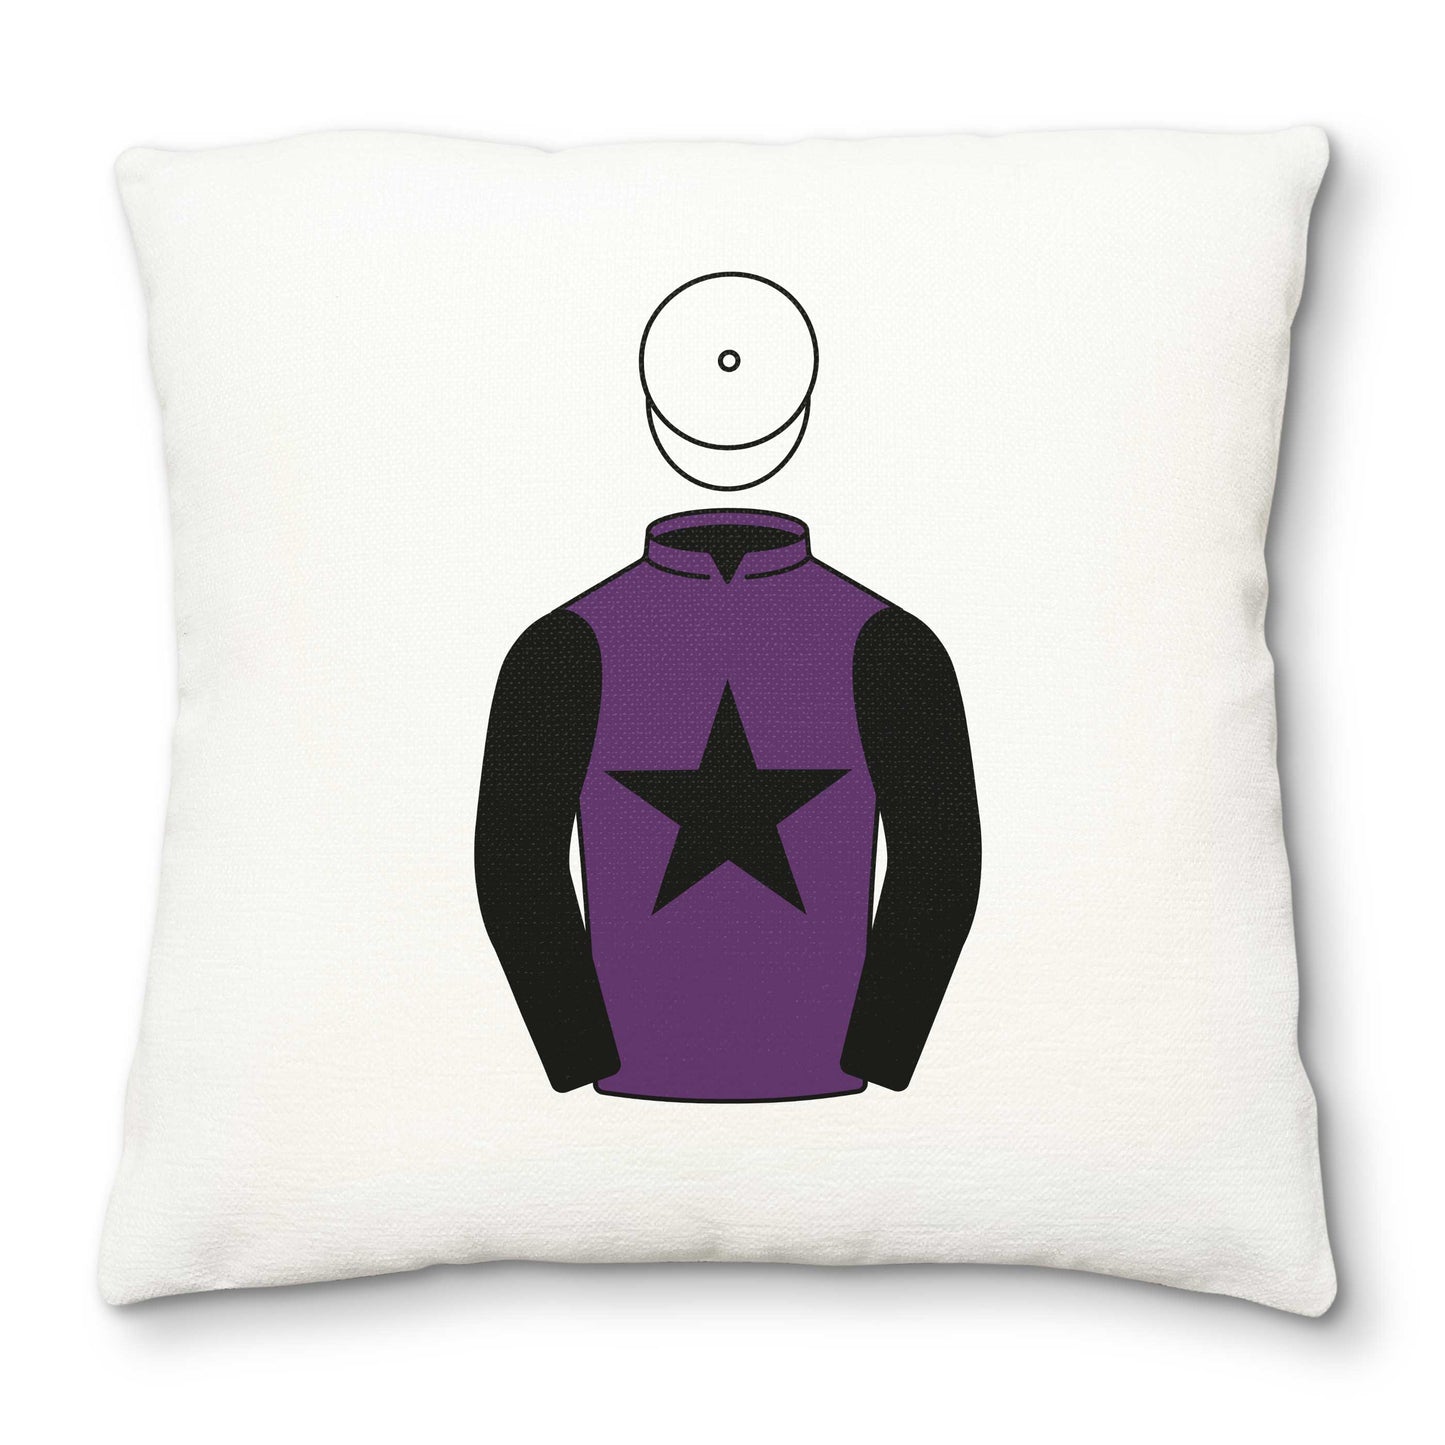 David Bobbett Deluxe Cushion Cover - Deluxe Cushion Cover - Hacked Up